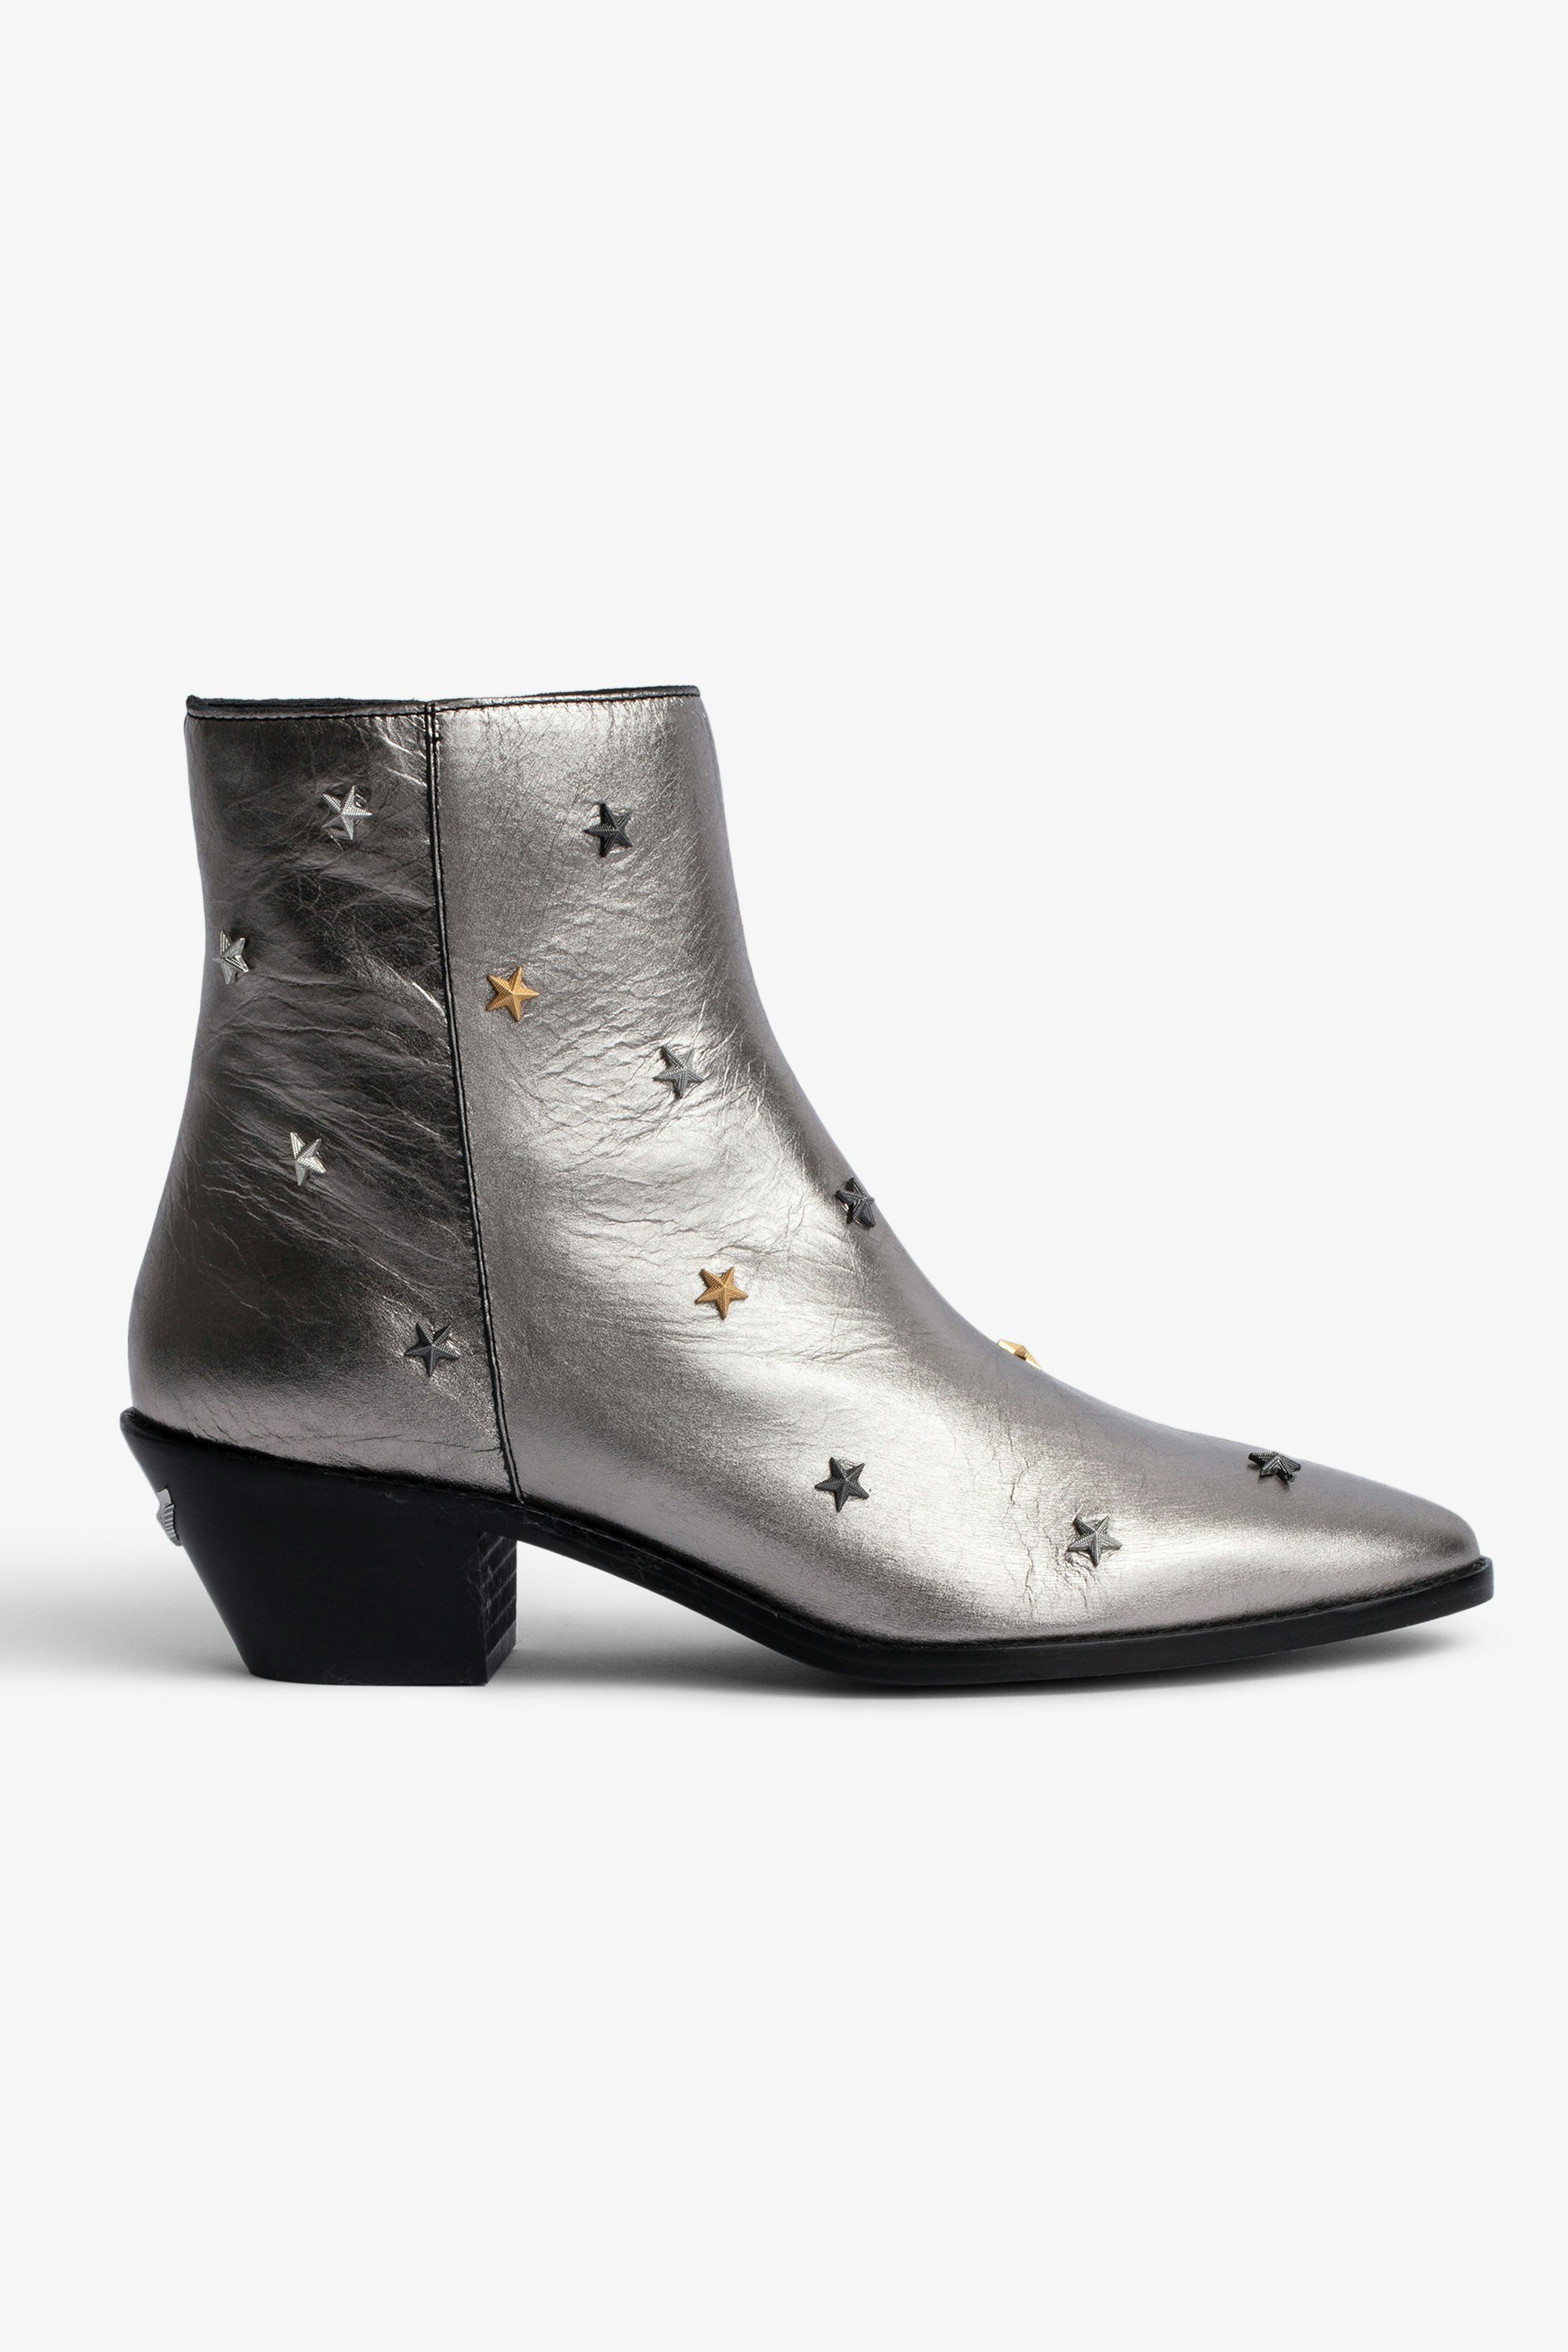 Tyler Vintage Ankle Boots Women’s silver leather ankle boots with star studs